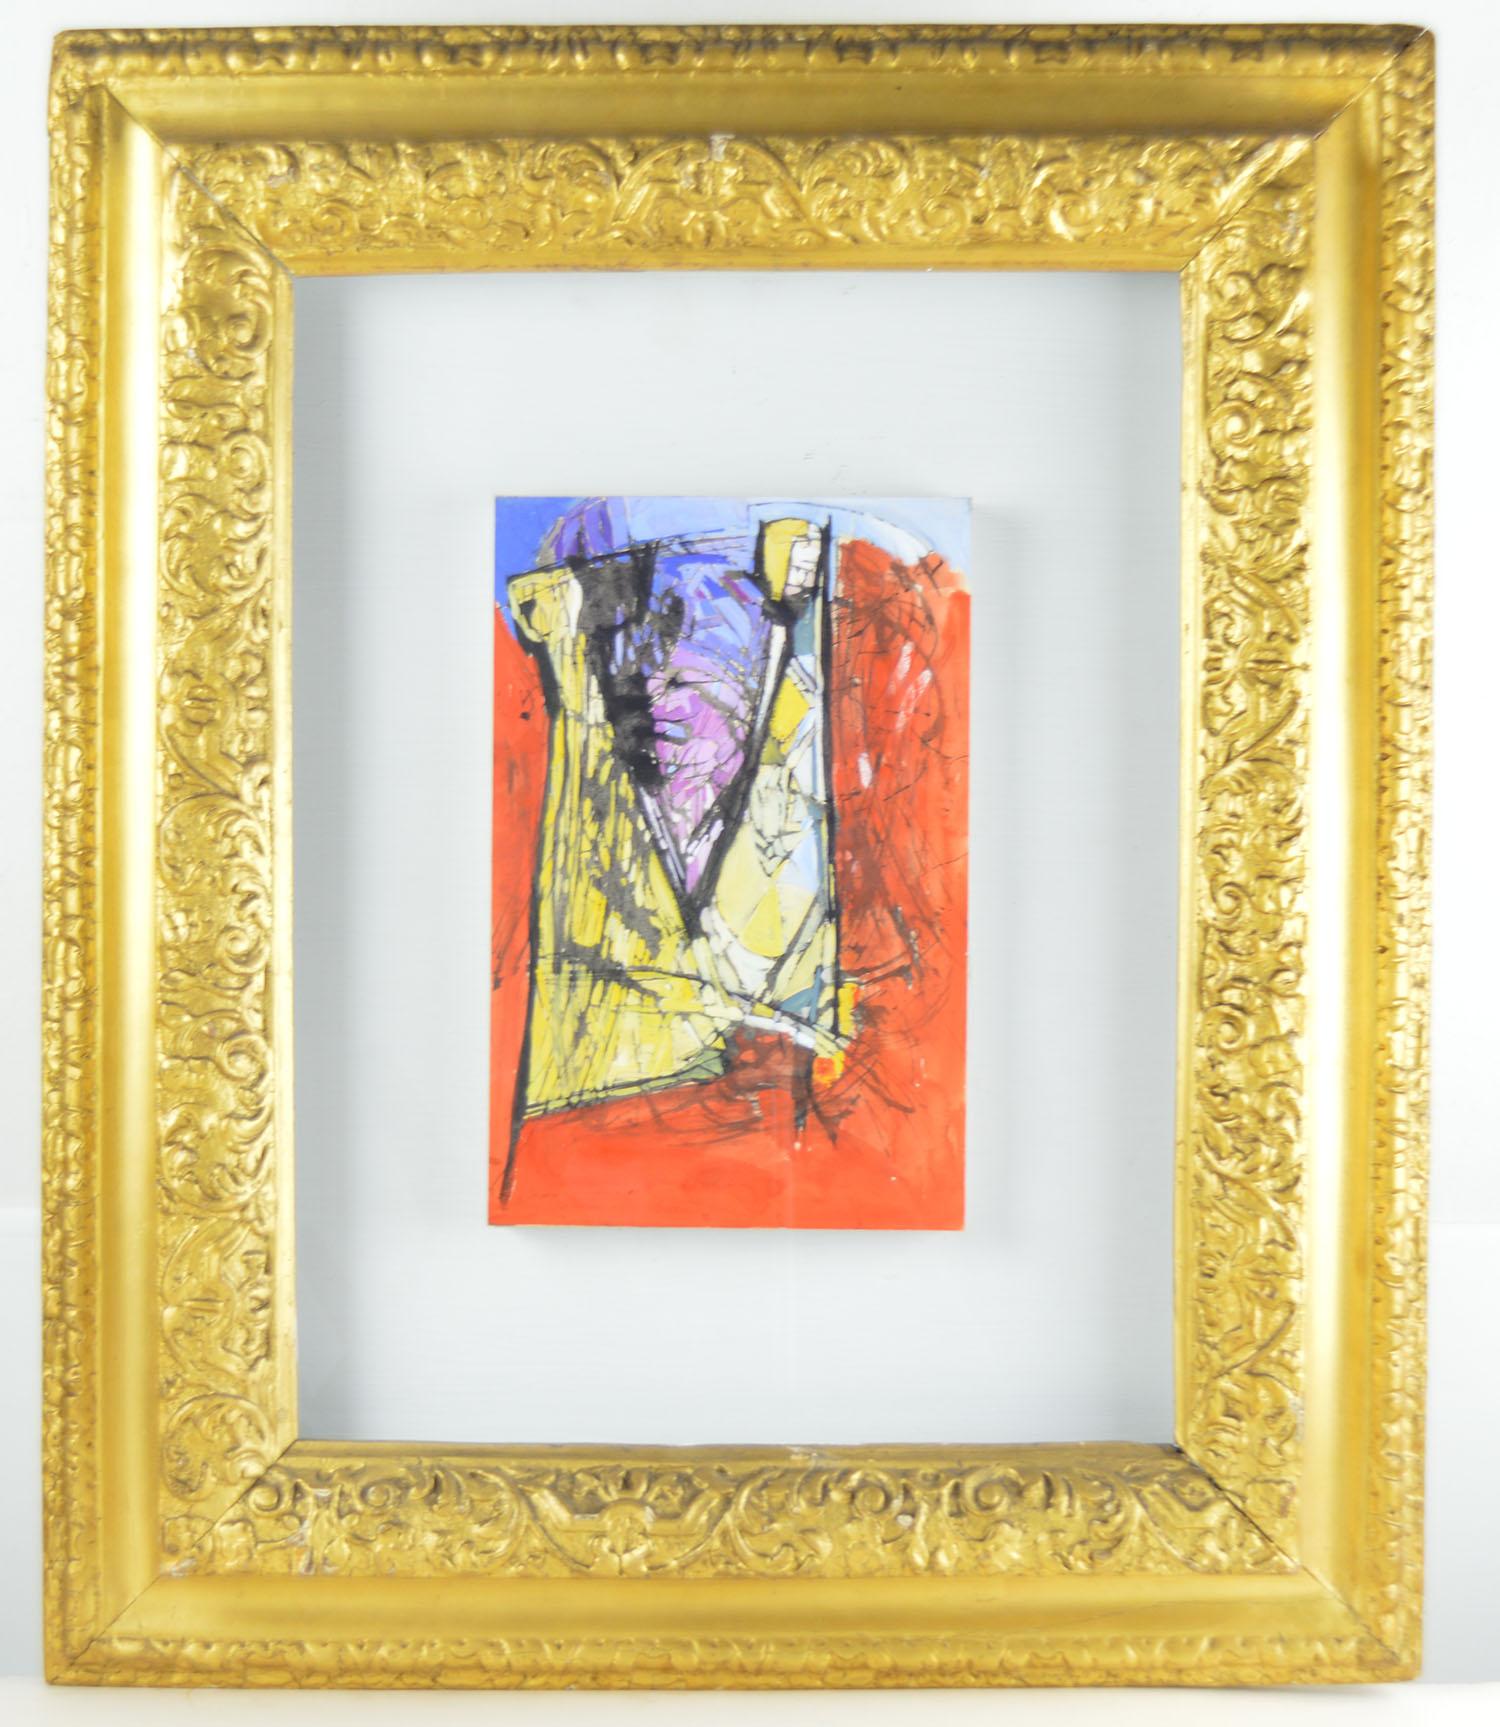 Wonderful figural abstract painting.

Artist unknown.

In the style of the very fashionable artist Lynn Chadwick

Lovely bright colors.

Gouache on card.

Presented in an 18th century giltwood frame.

The measurement given below is the frame